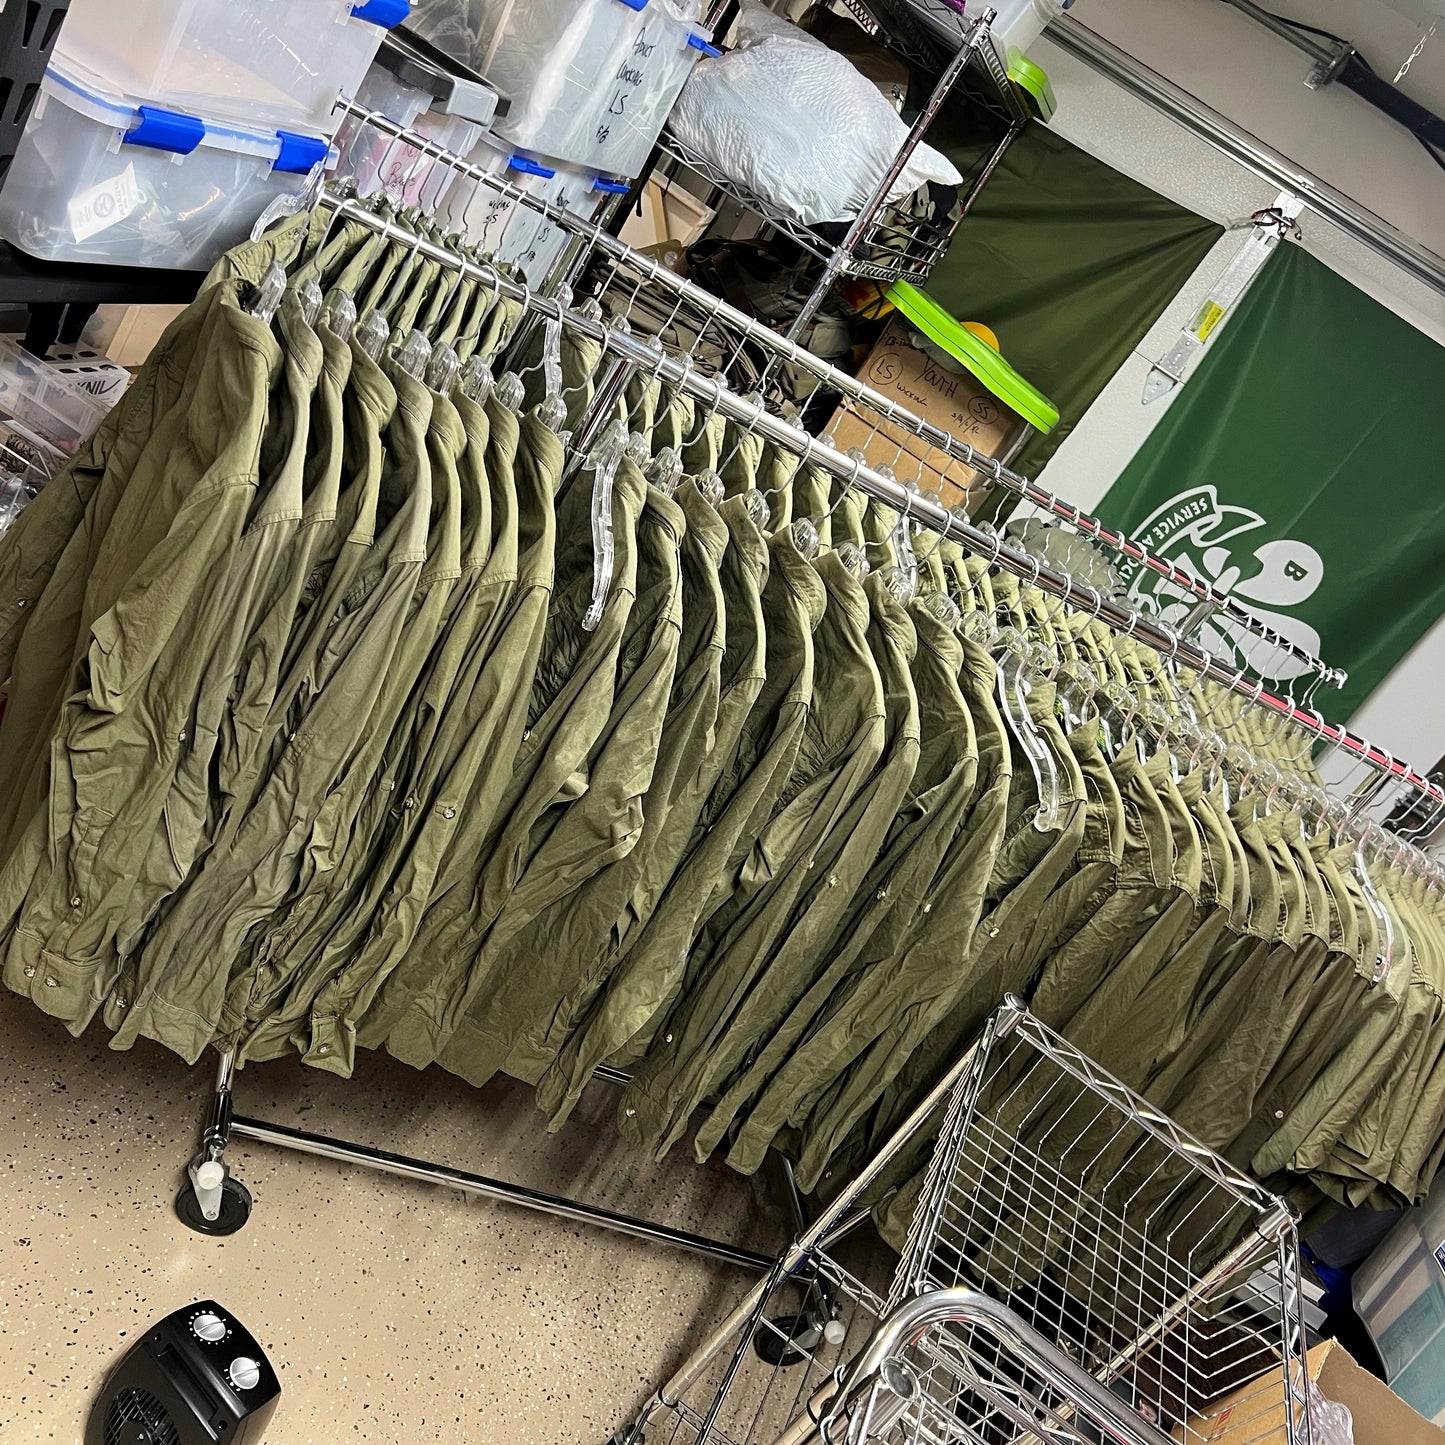 All Rover Section Uniform Shirts, Men's Sizes